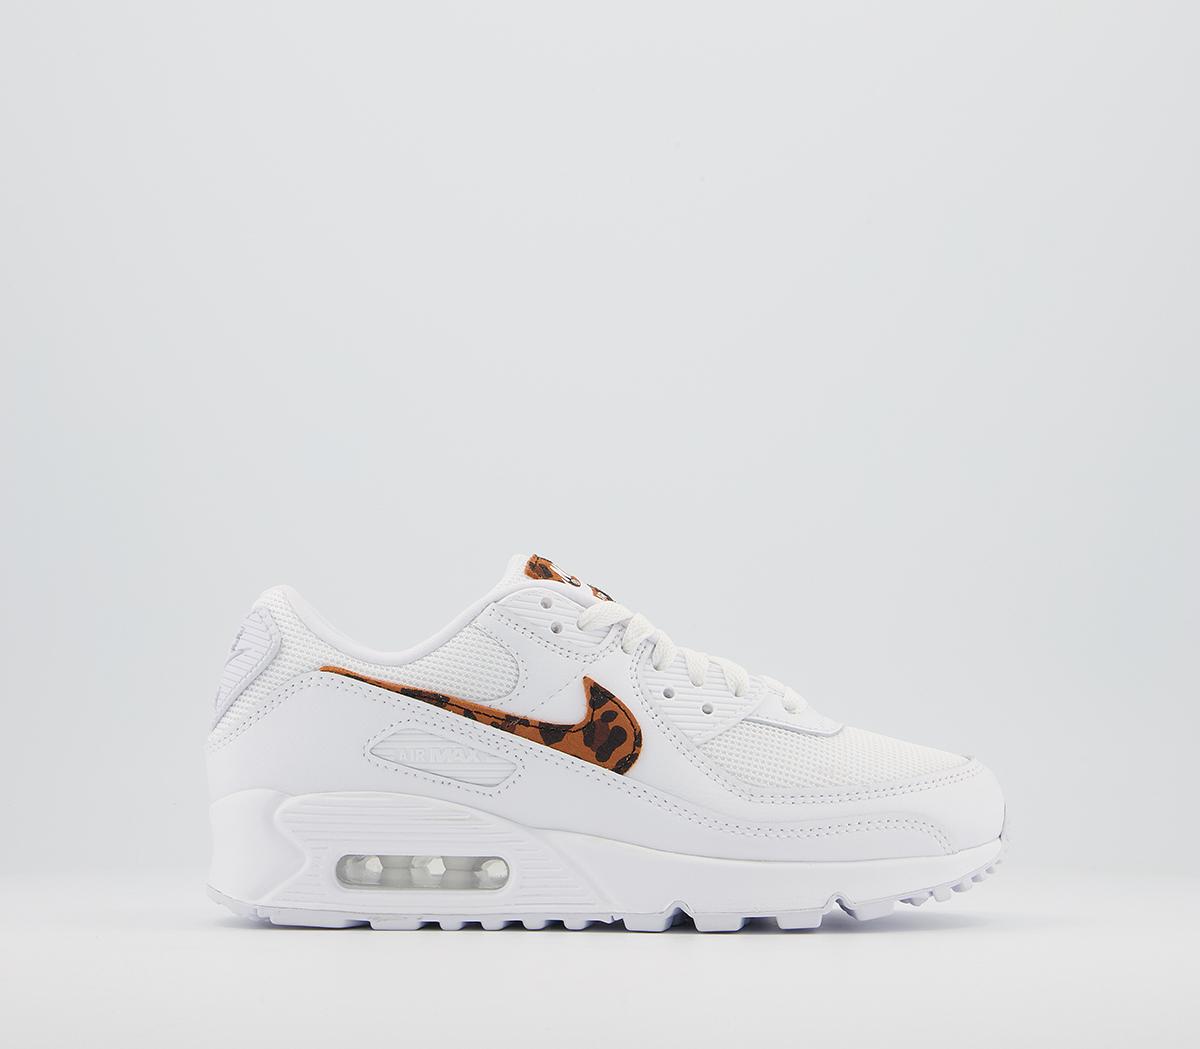 Nike Air Max 90 Trainers White Leopard - Women's Trainers